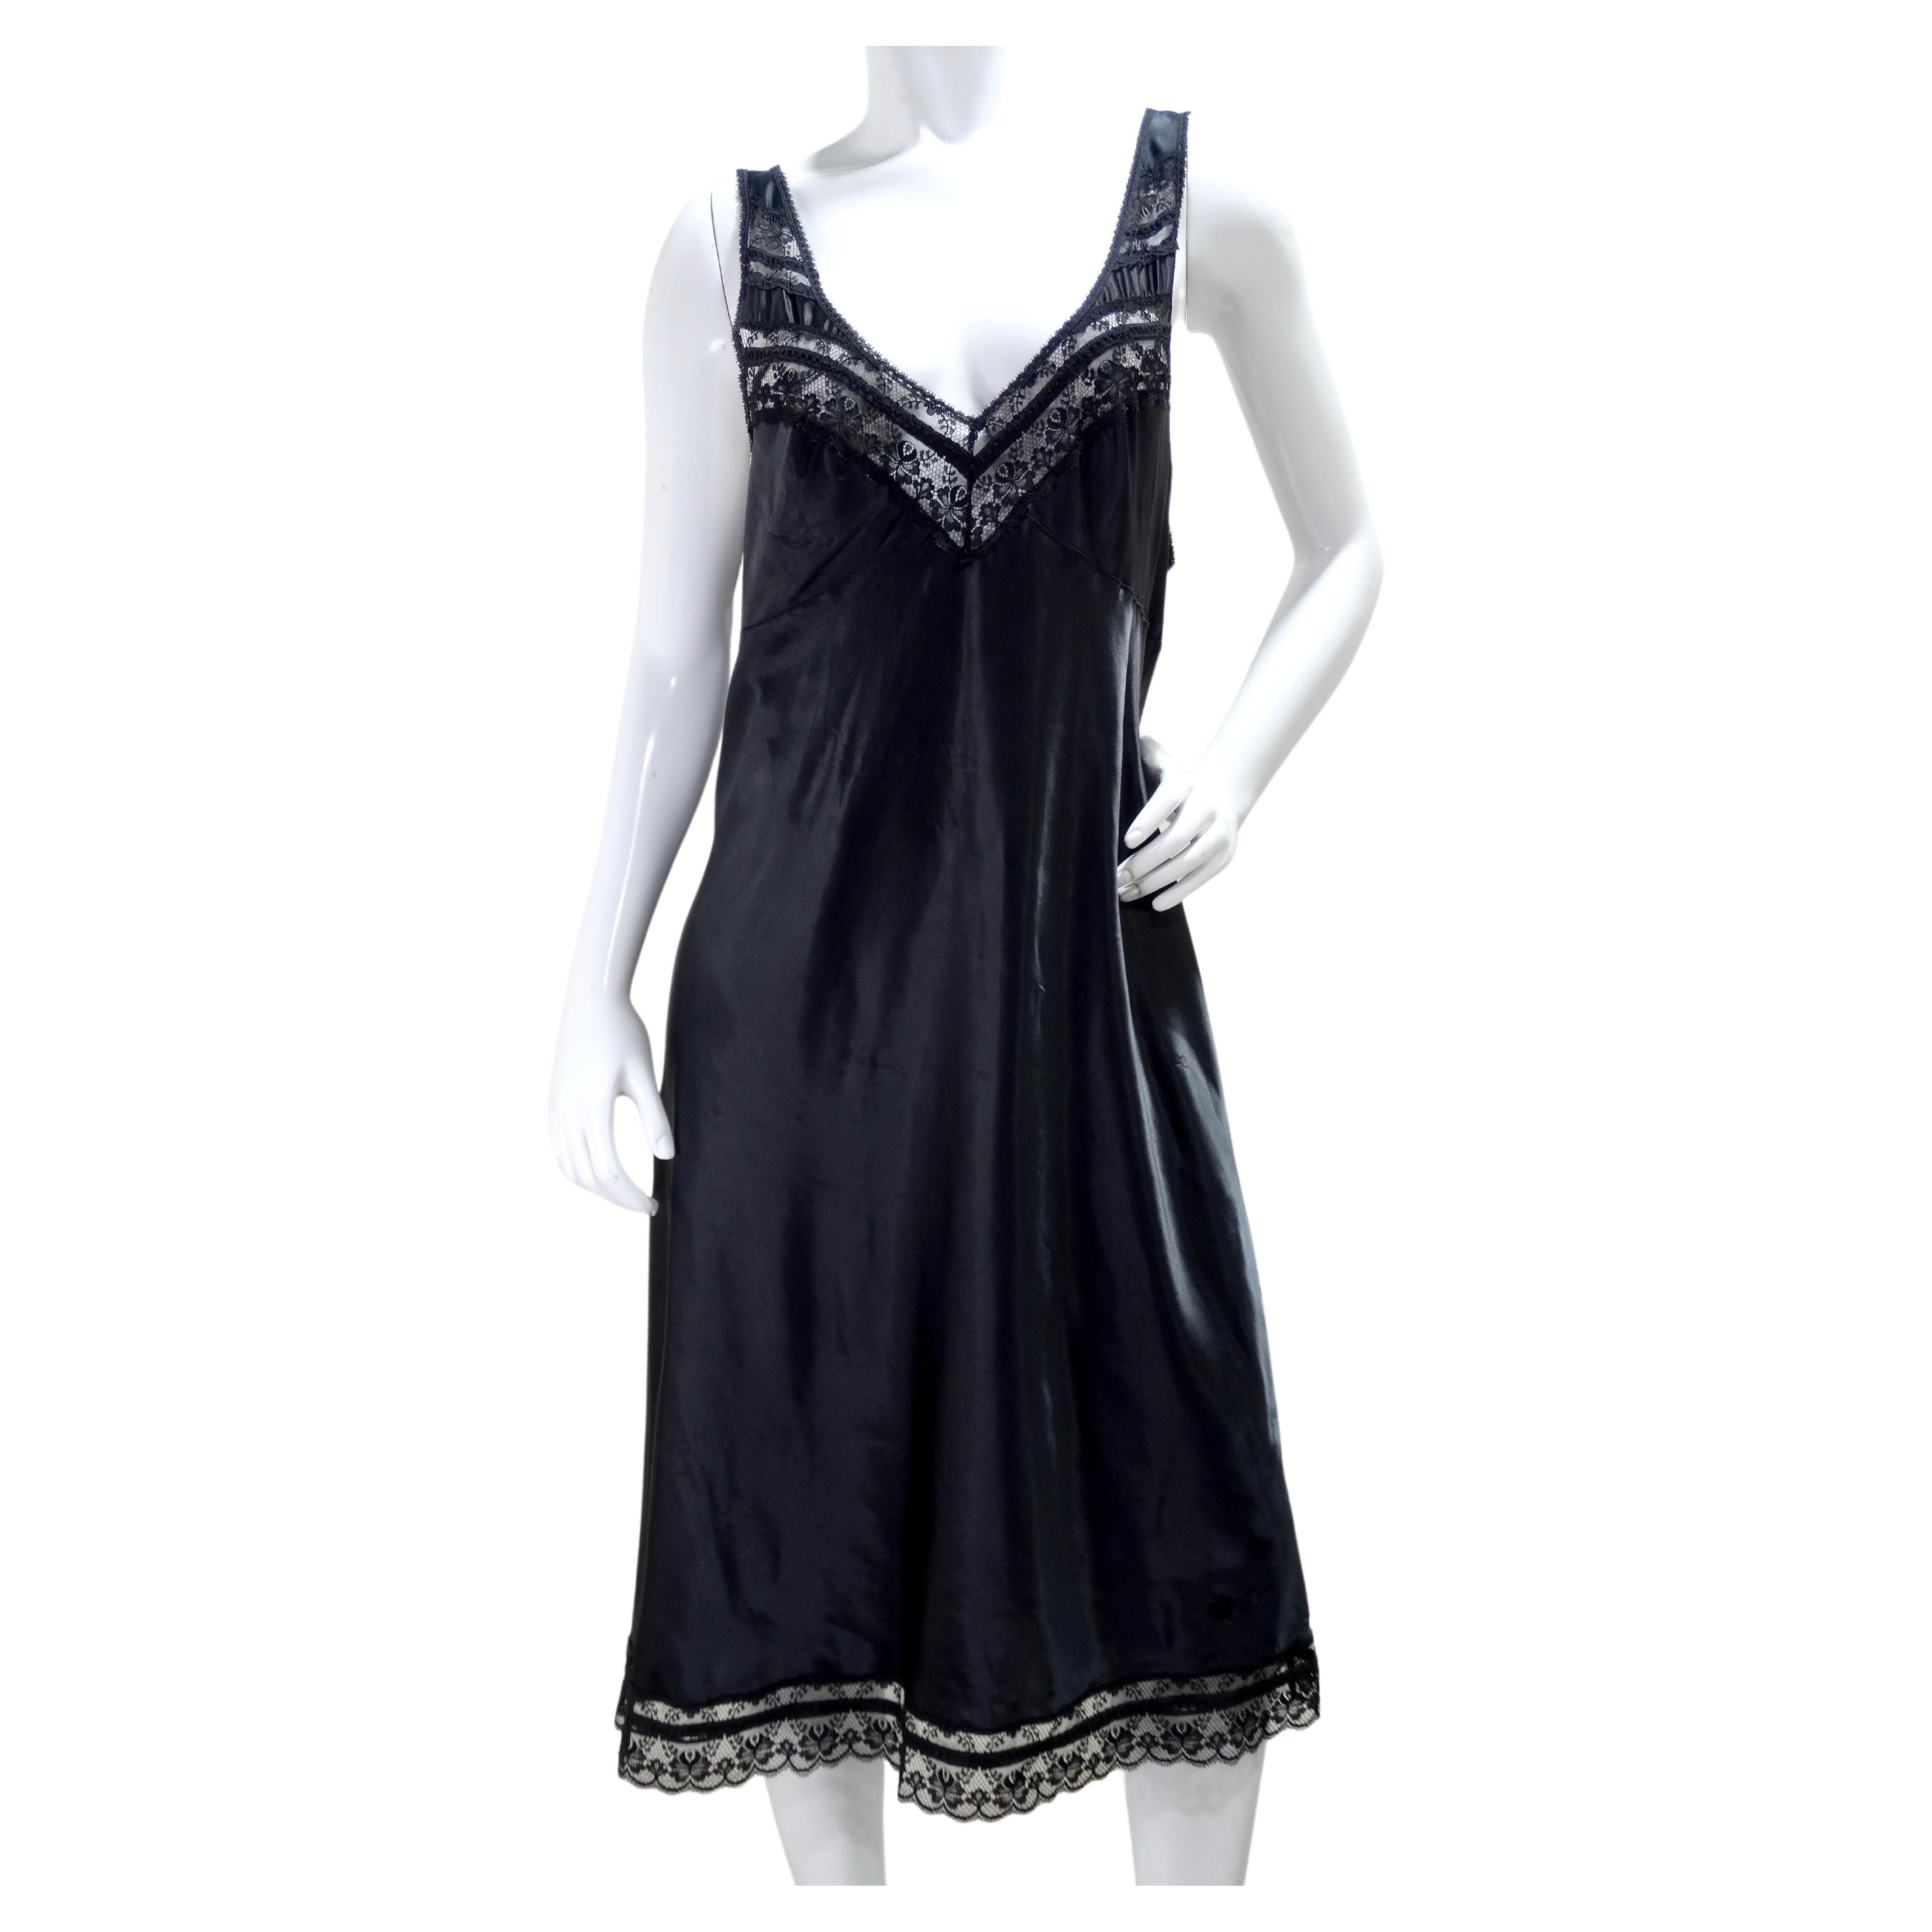 What era are slip dresses from?